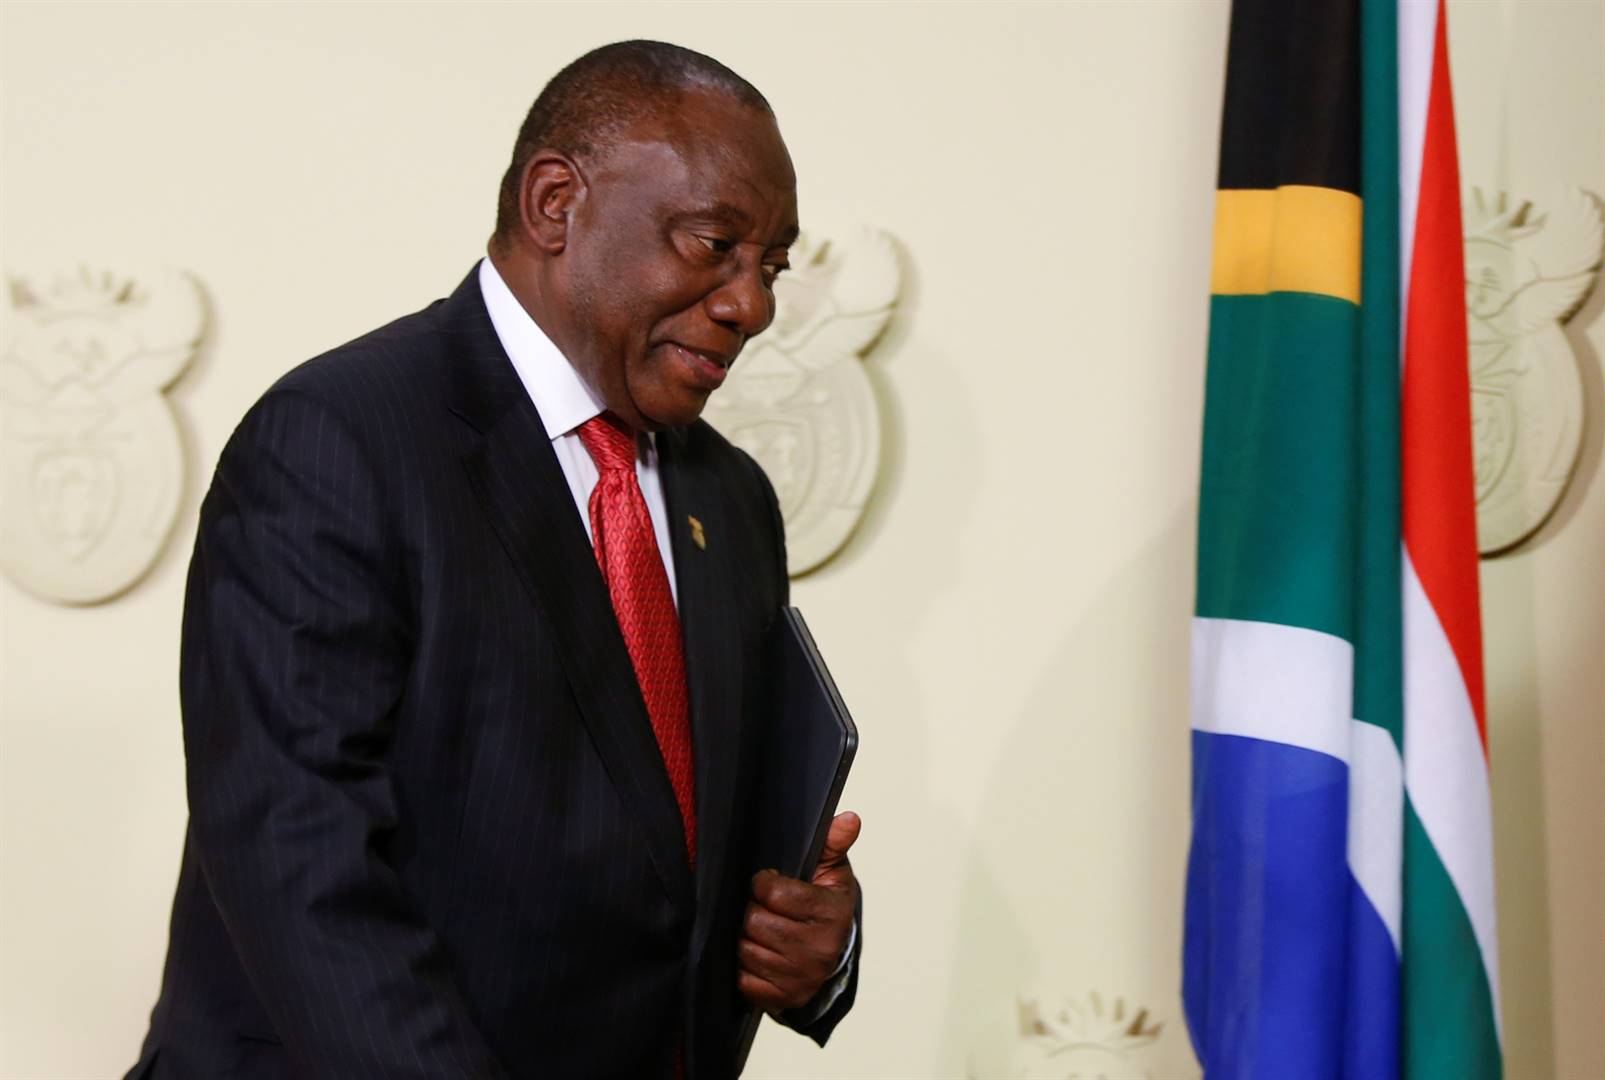 Cyril Ramaphosa leaves after the announcement of the new Cabinet in Pretoria. Picture: Siphiwe Sibeko/Reuters